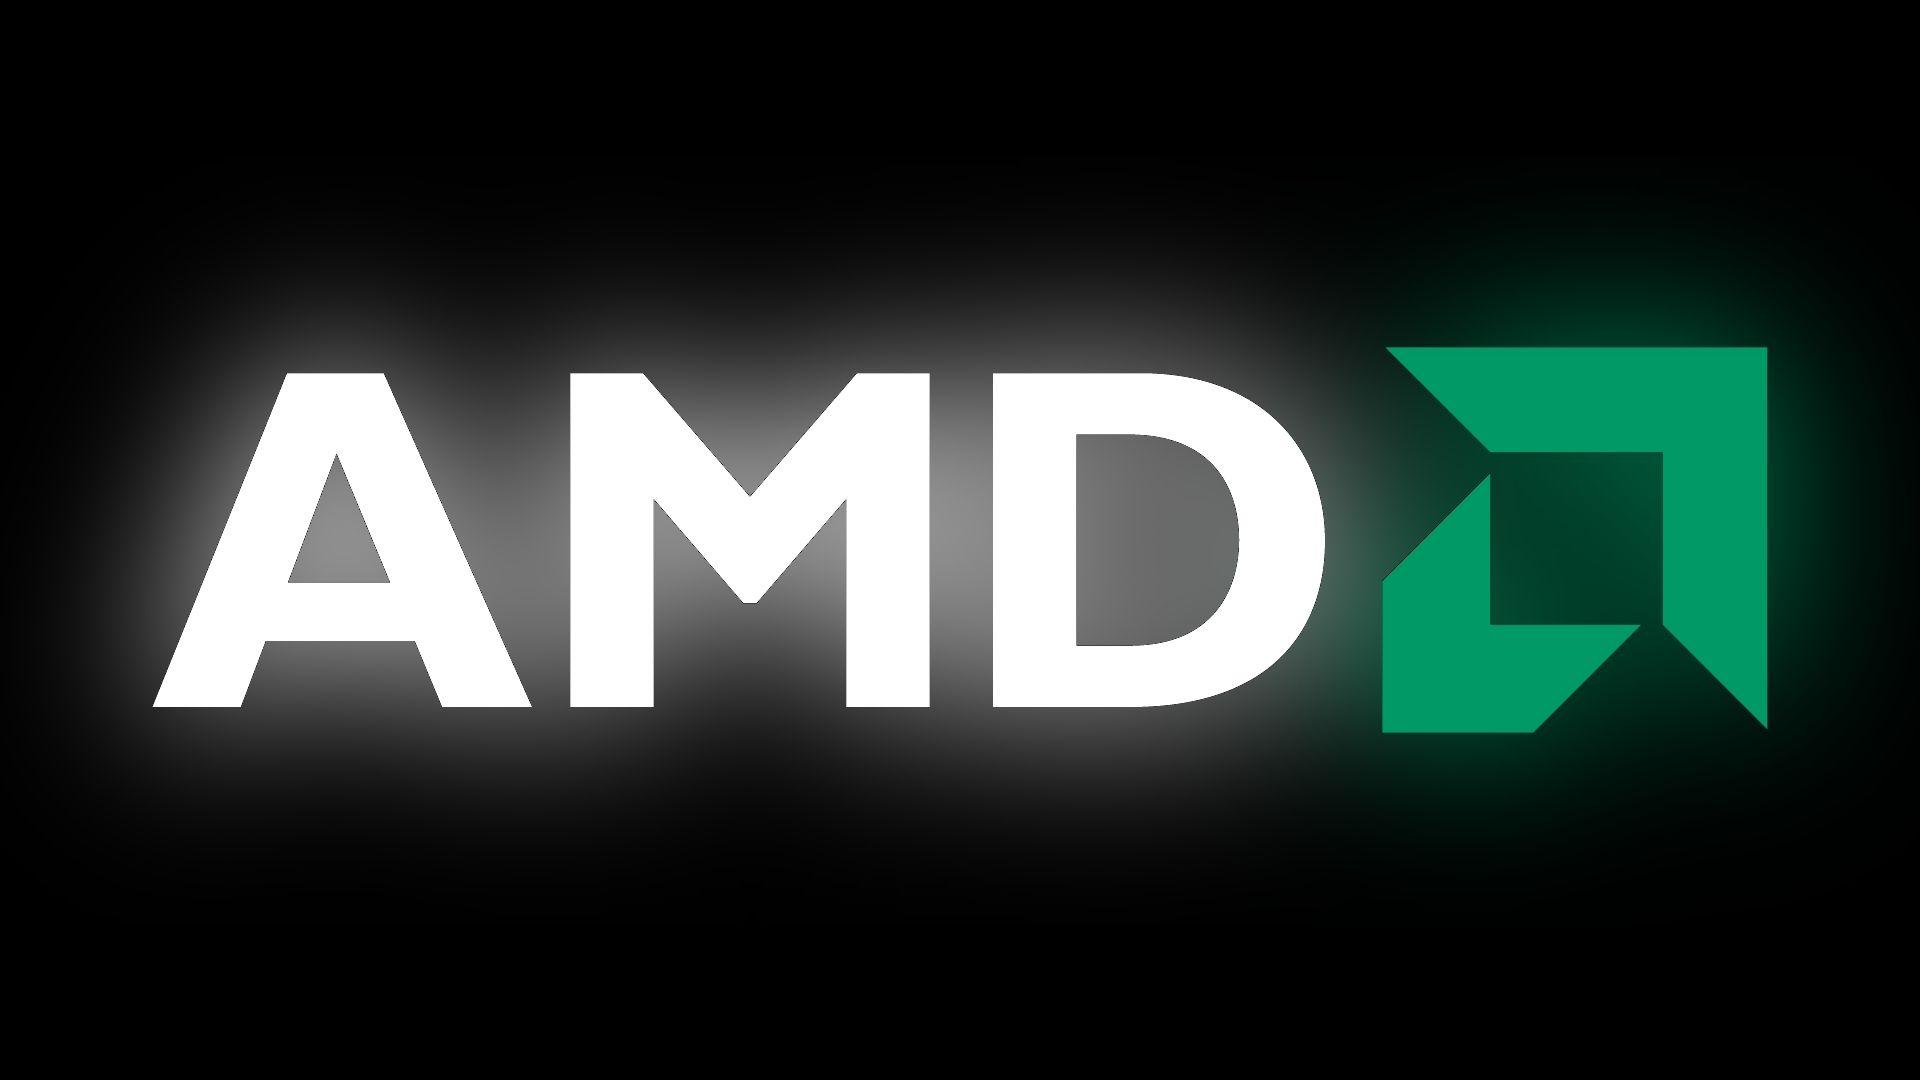 Amd wallpapers